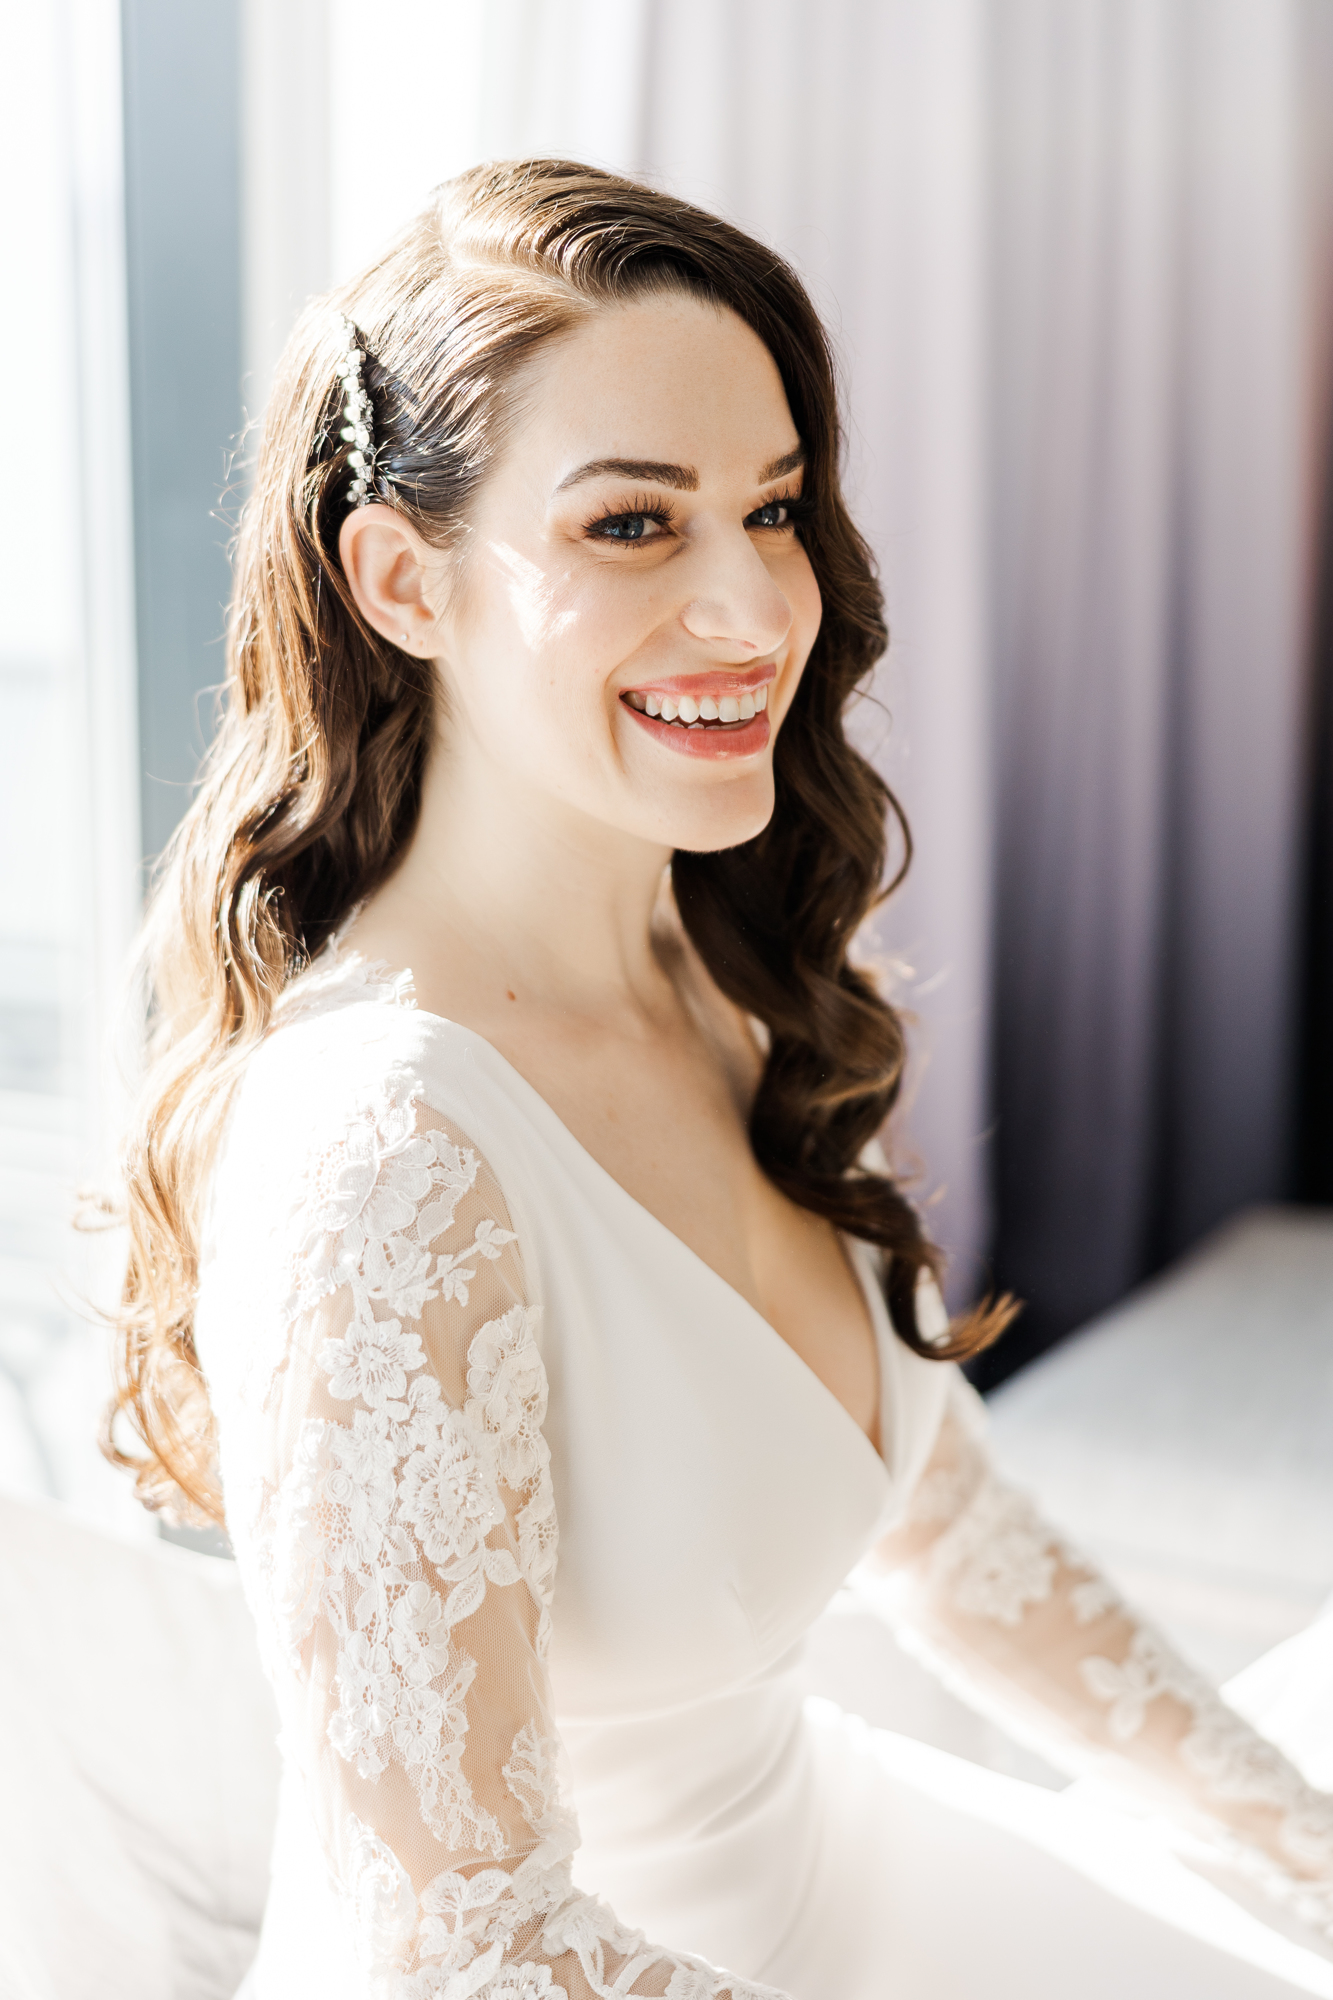 Fabulous Brooklyn Wedding Photography at 74Wythe with Rooftop NYC Views